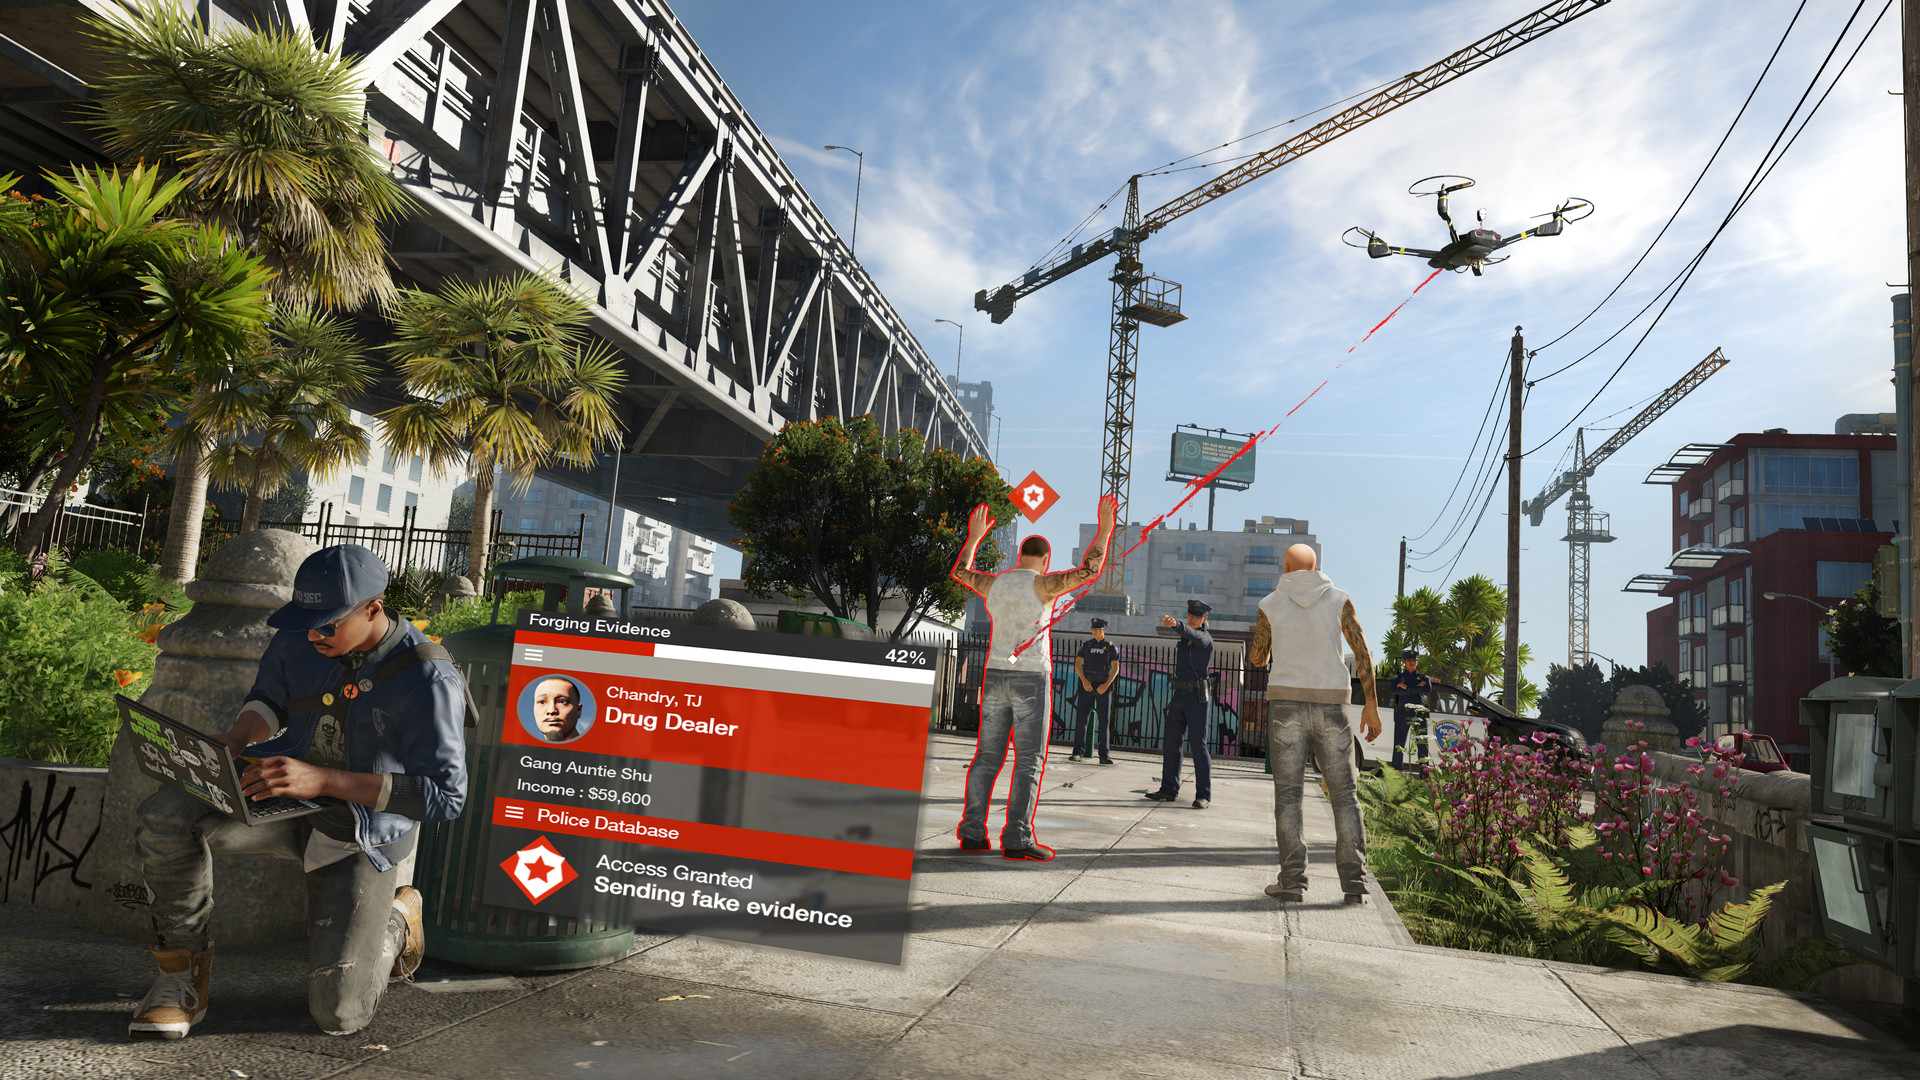 Why Watch Dogs Was Delayed - GTA V's Quality Inspired Ubisoft To Delay ...